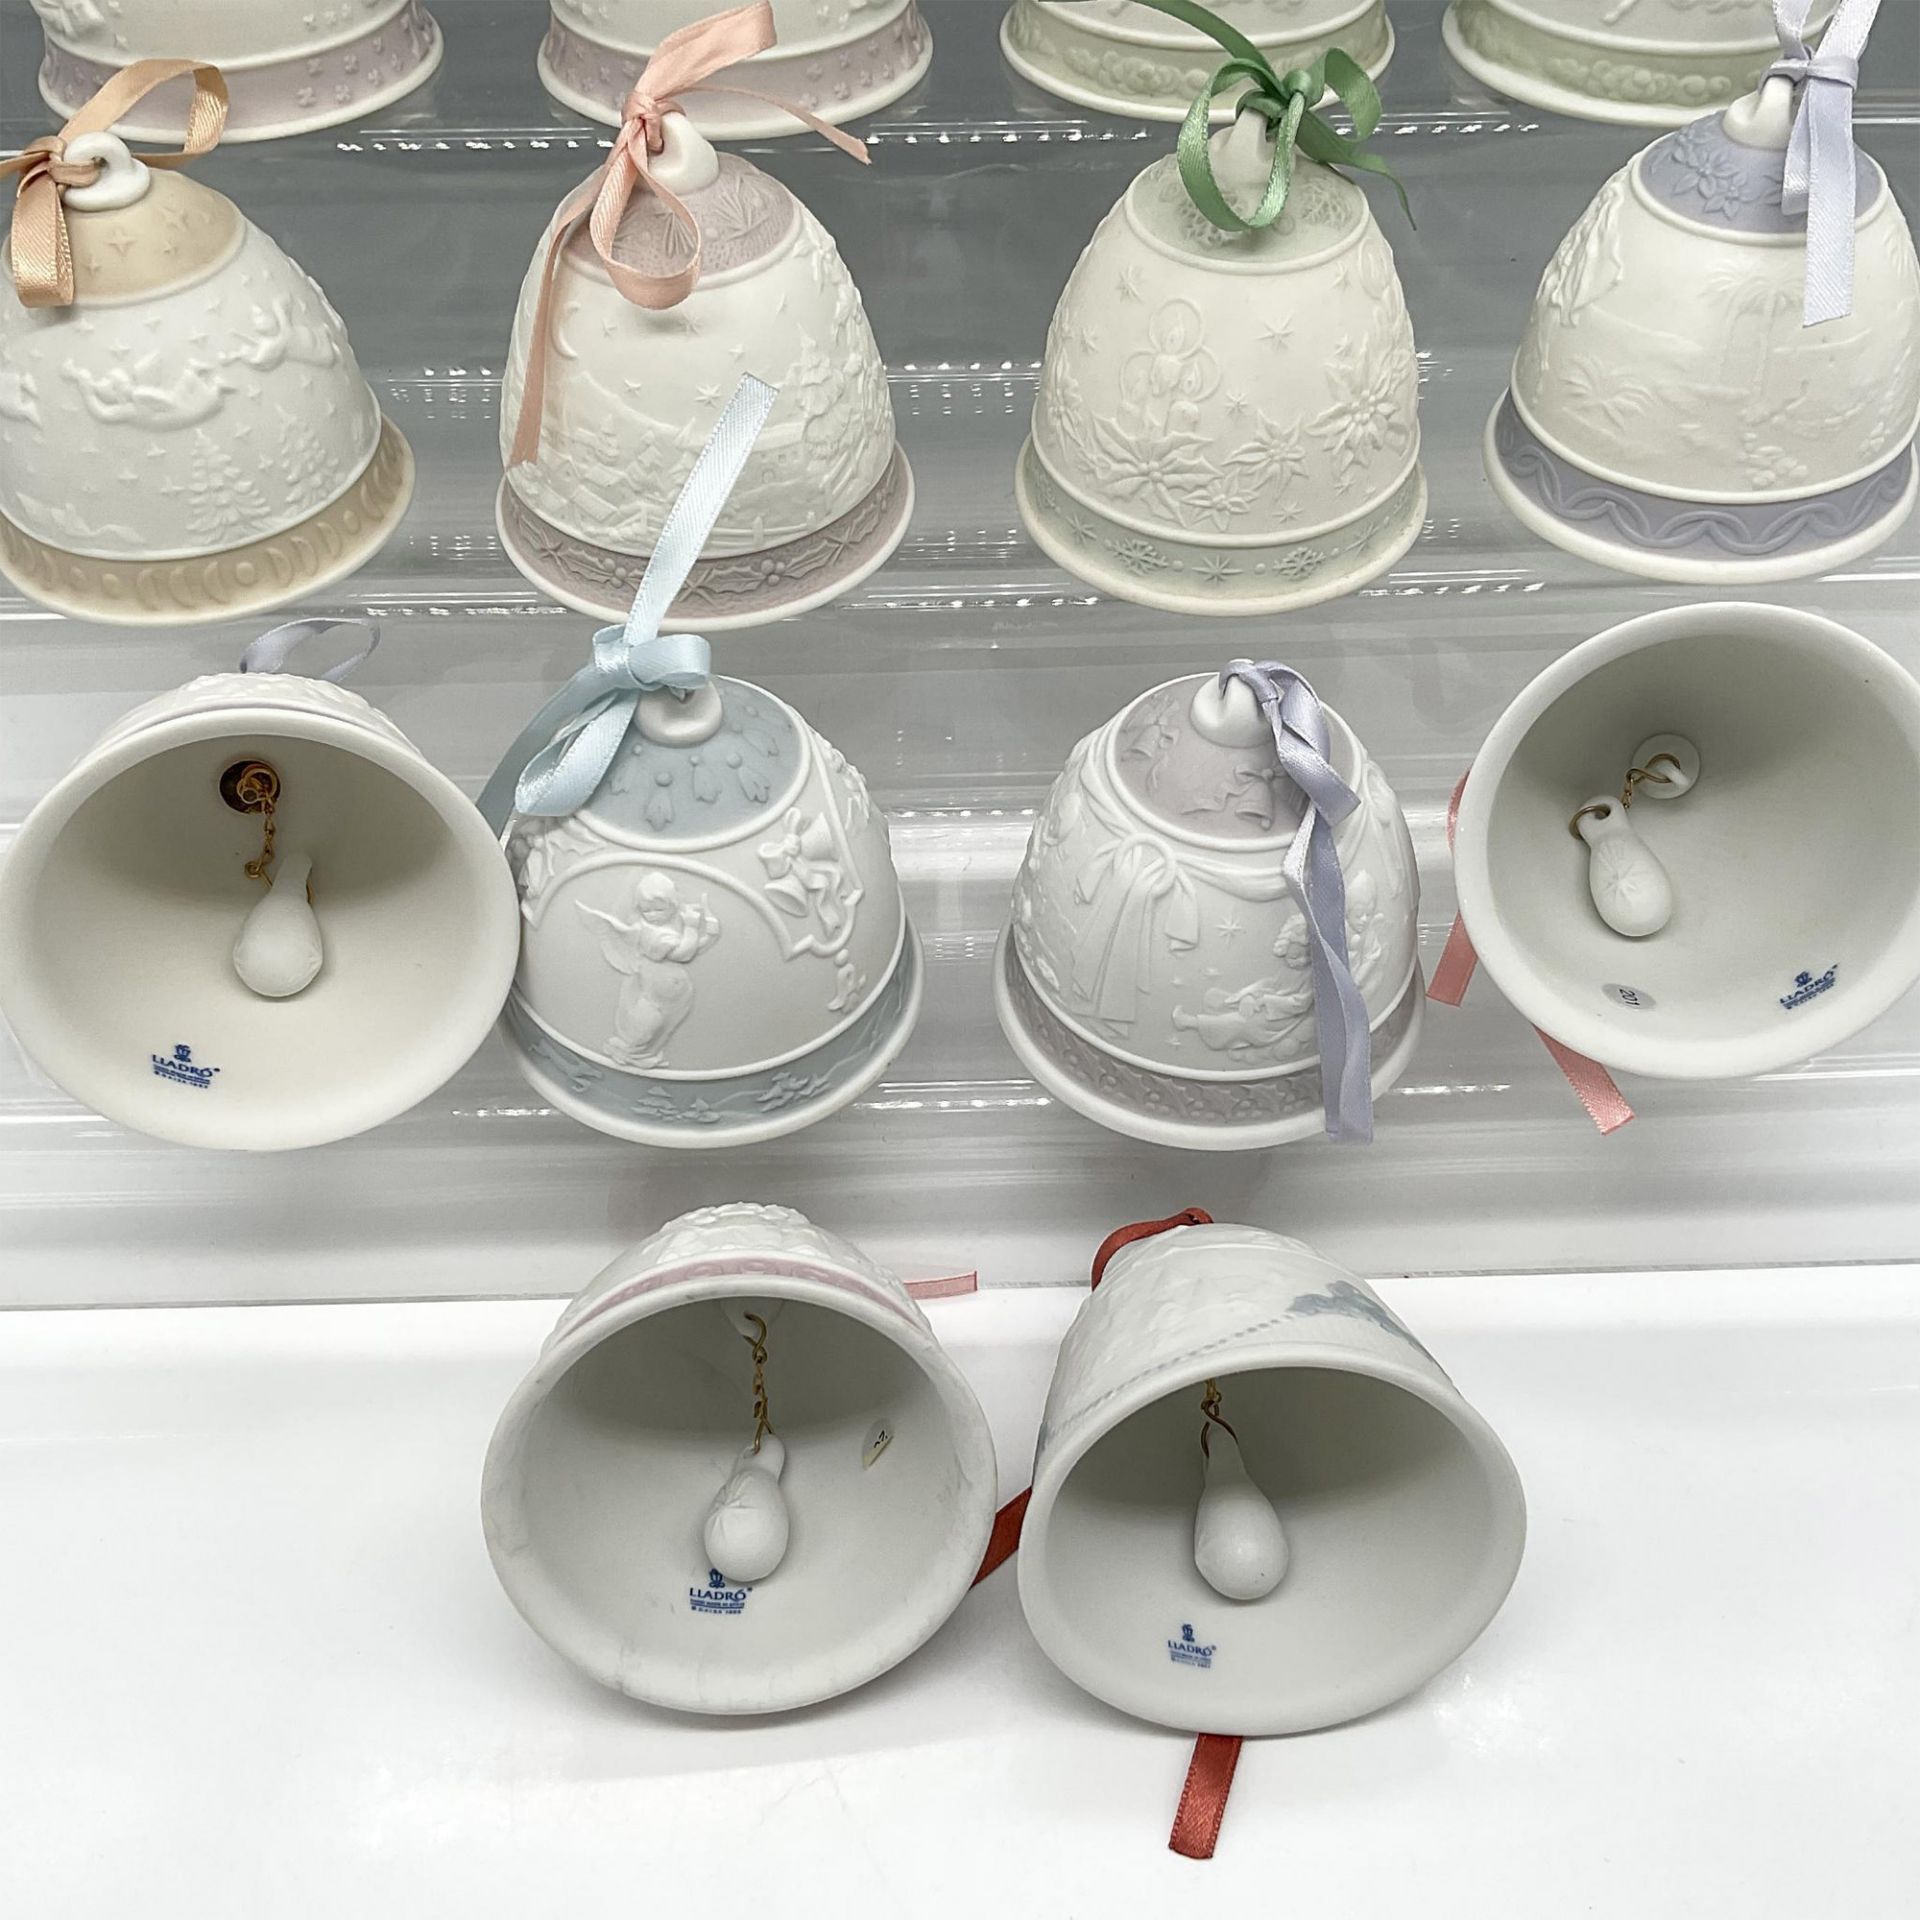 14pc Lladro Porcelain Annual Holiday Bell Ornaments - Image 3 of 3